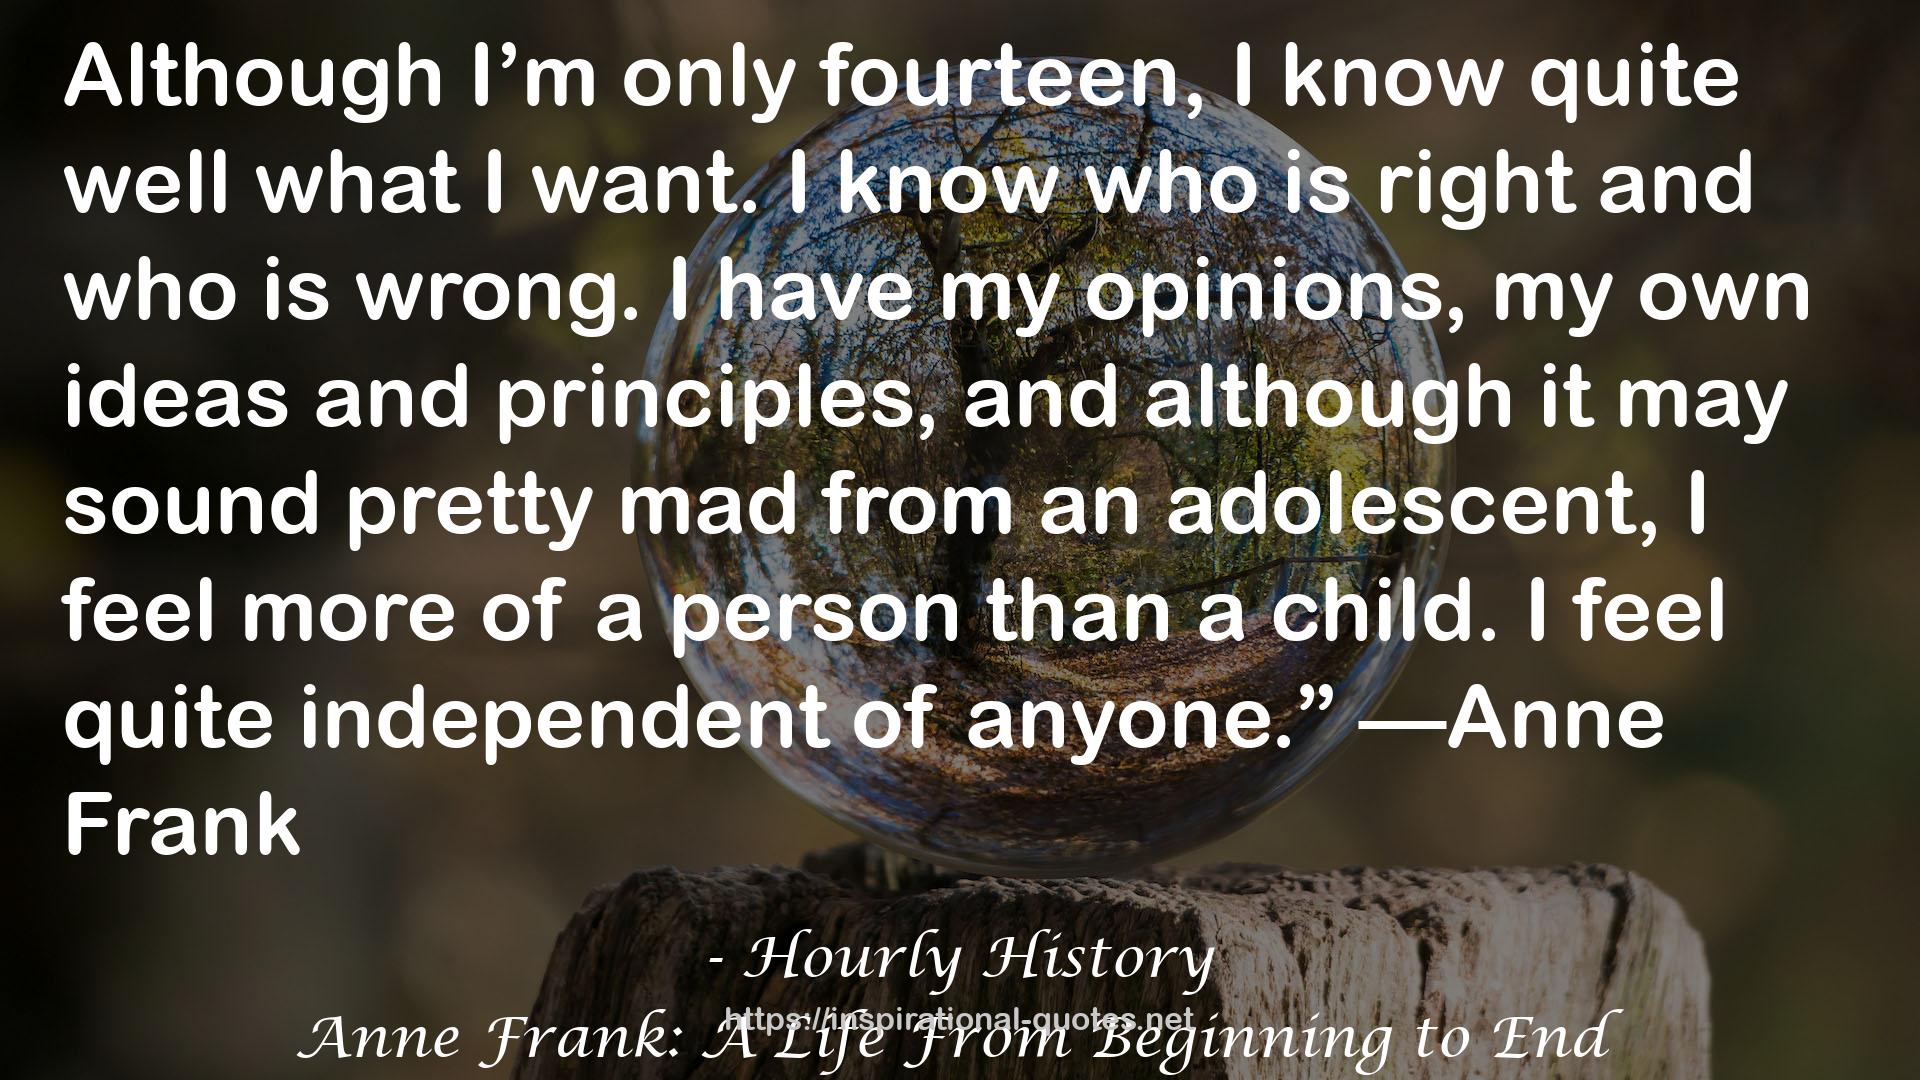 Anne Frank: A Life From Beginning to End QUOTES